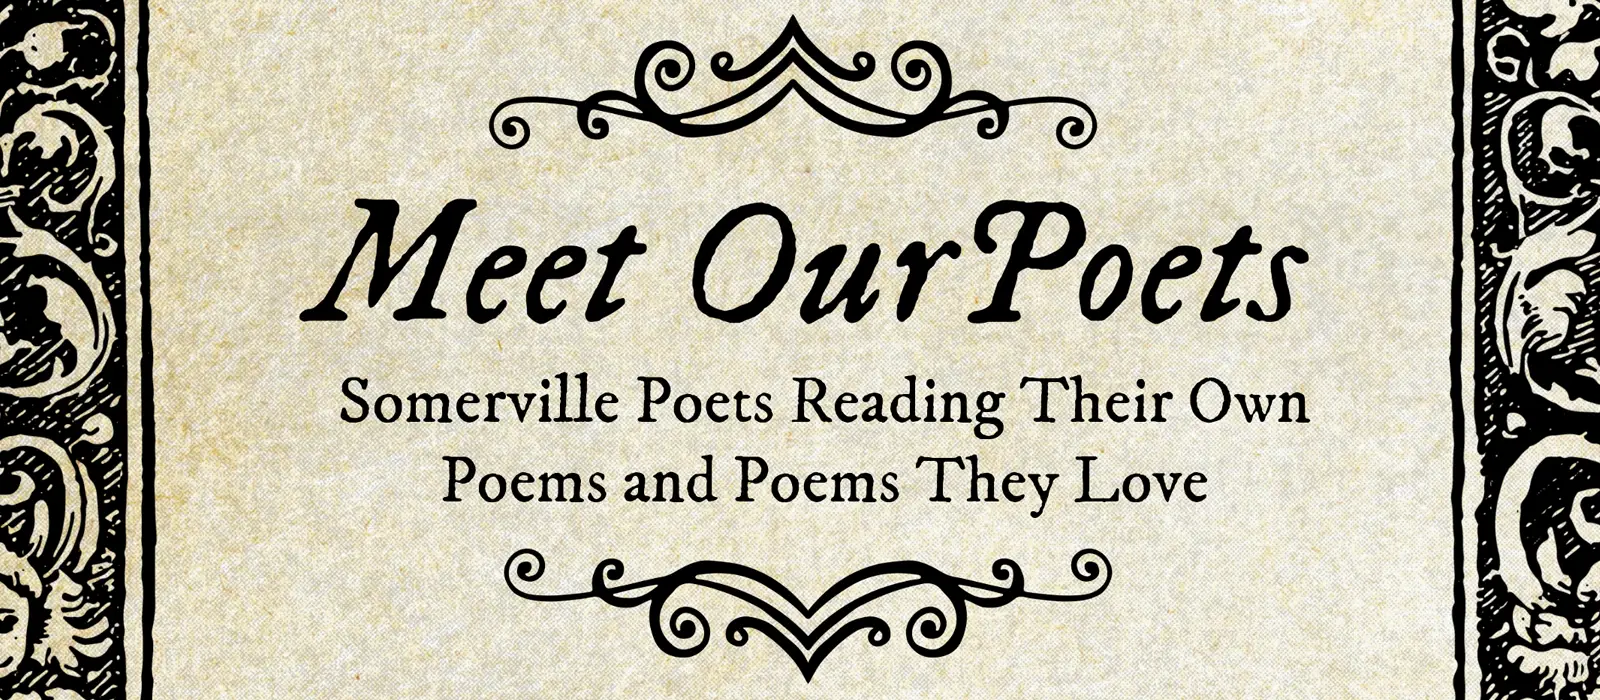 Somerville Poets reading their own poems